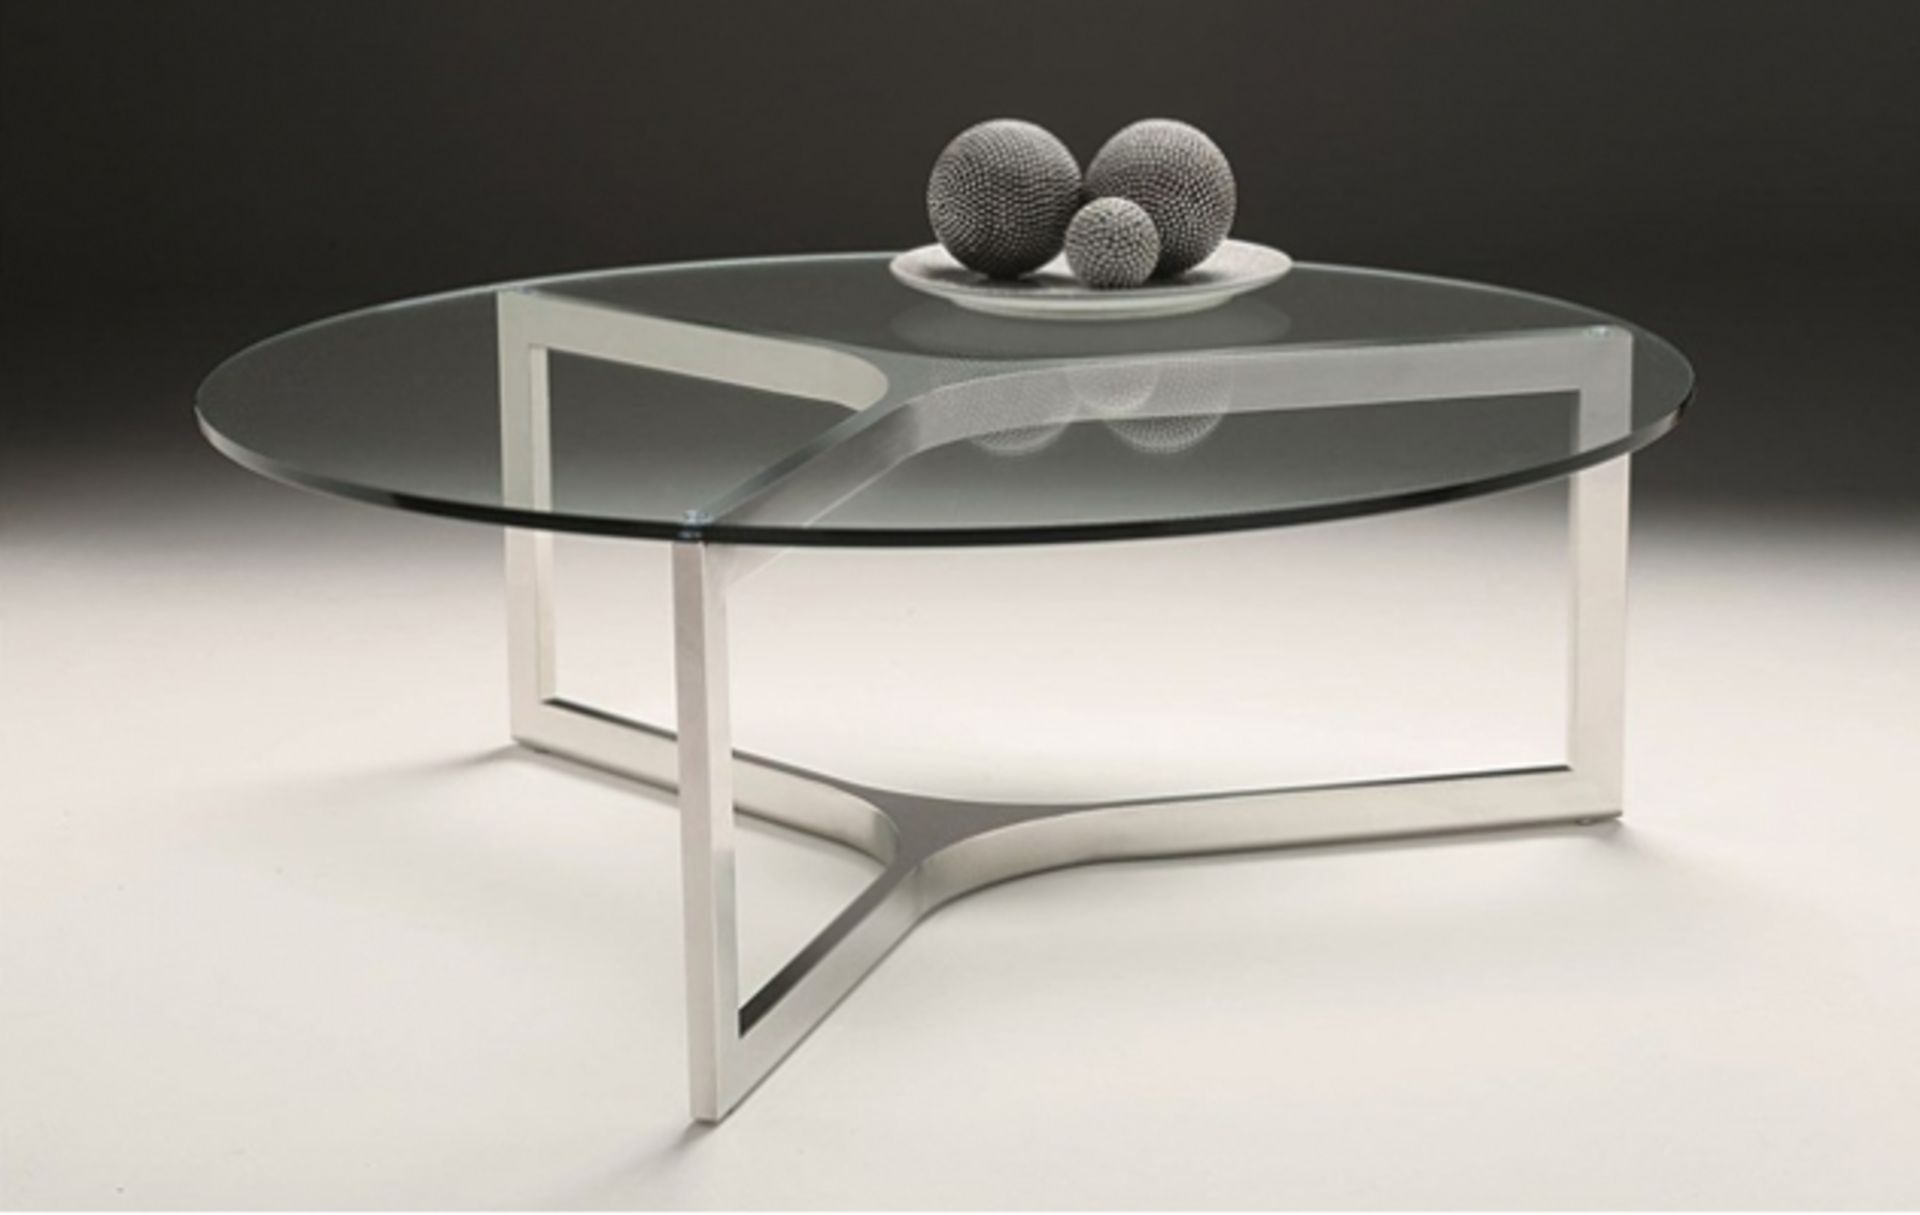 1 x Designer Chelsom REVOLVE Coffee Table - CL081 - Laser Cut Polished Stainless Steel Base With